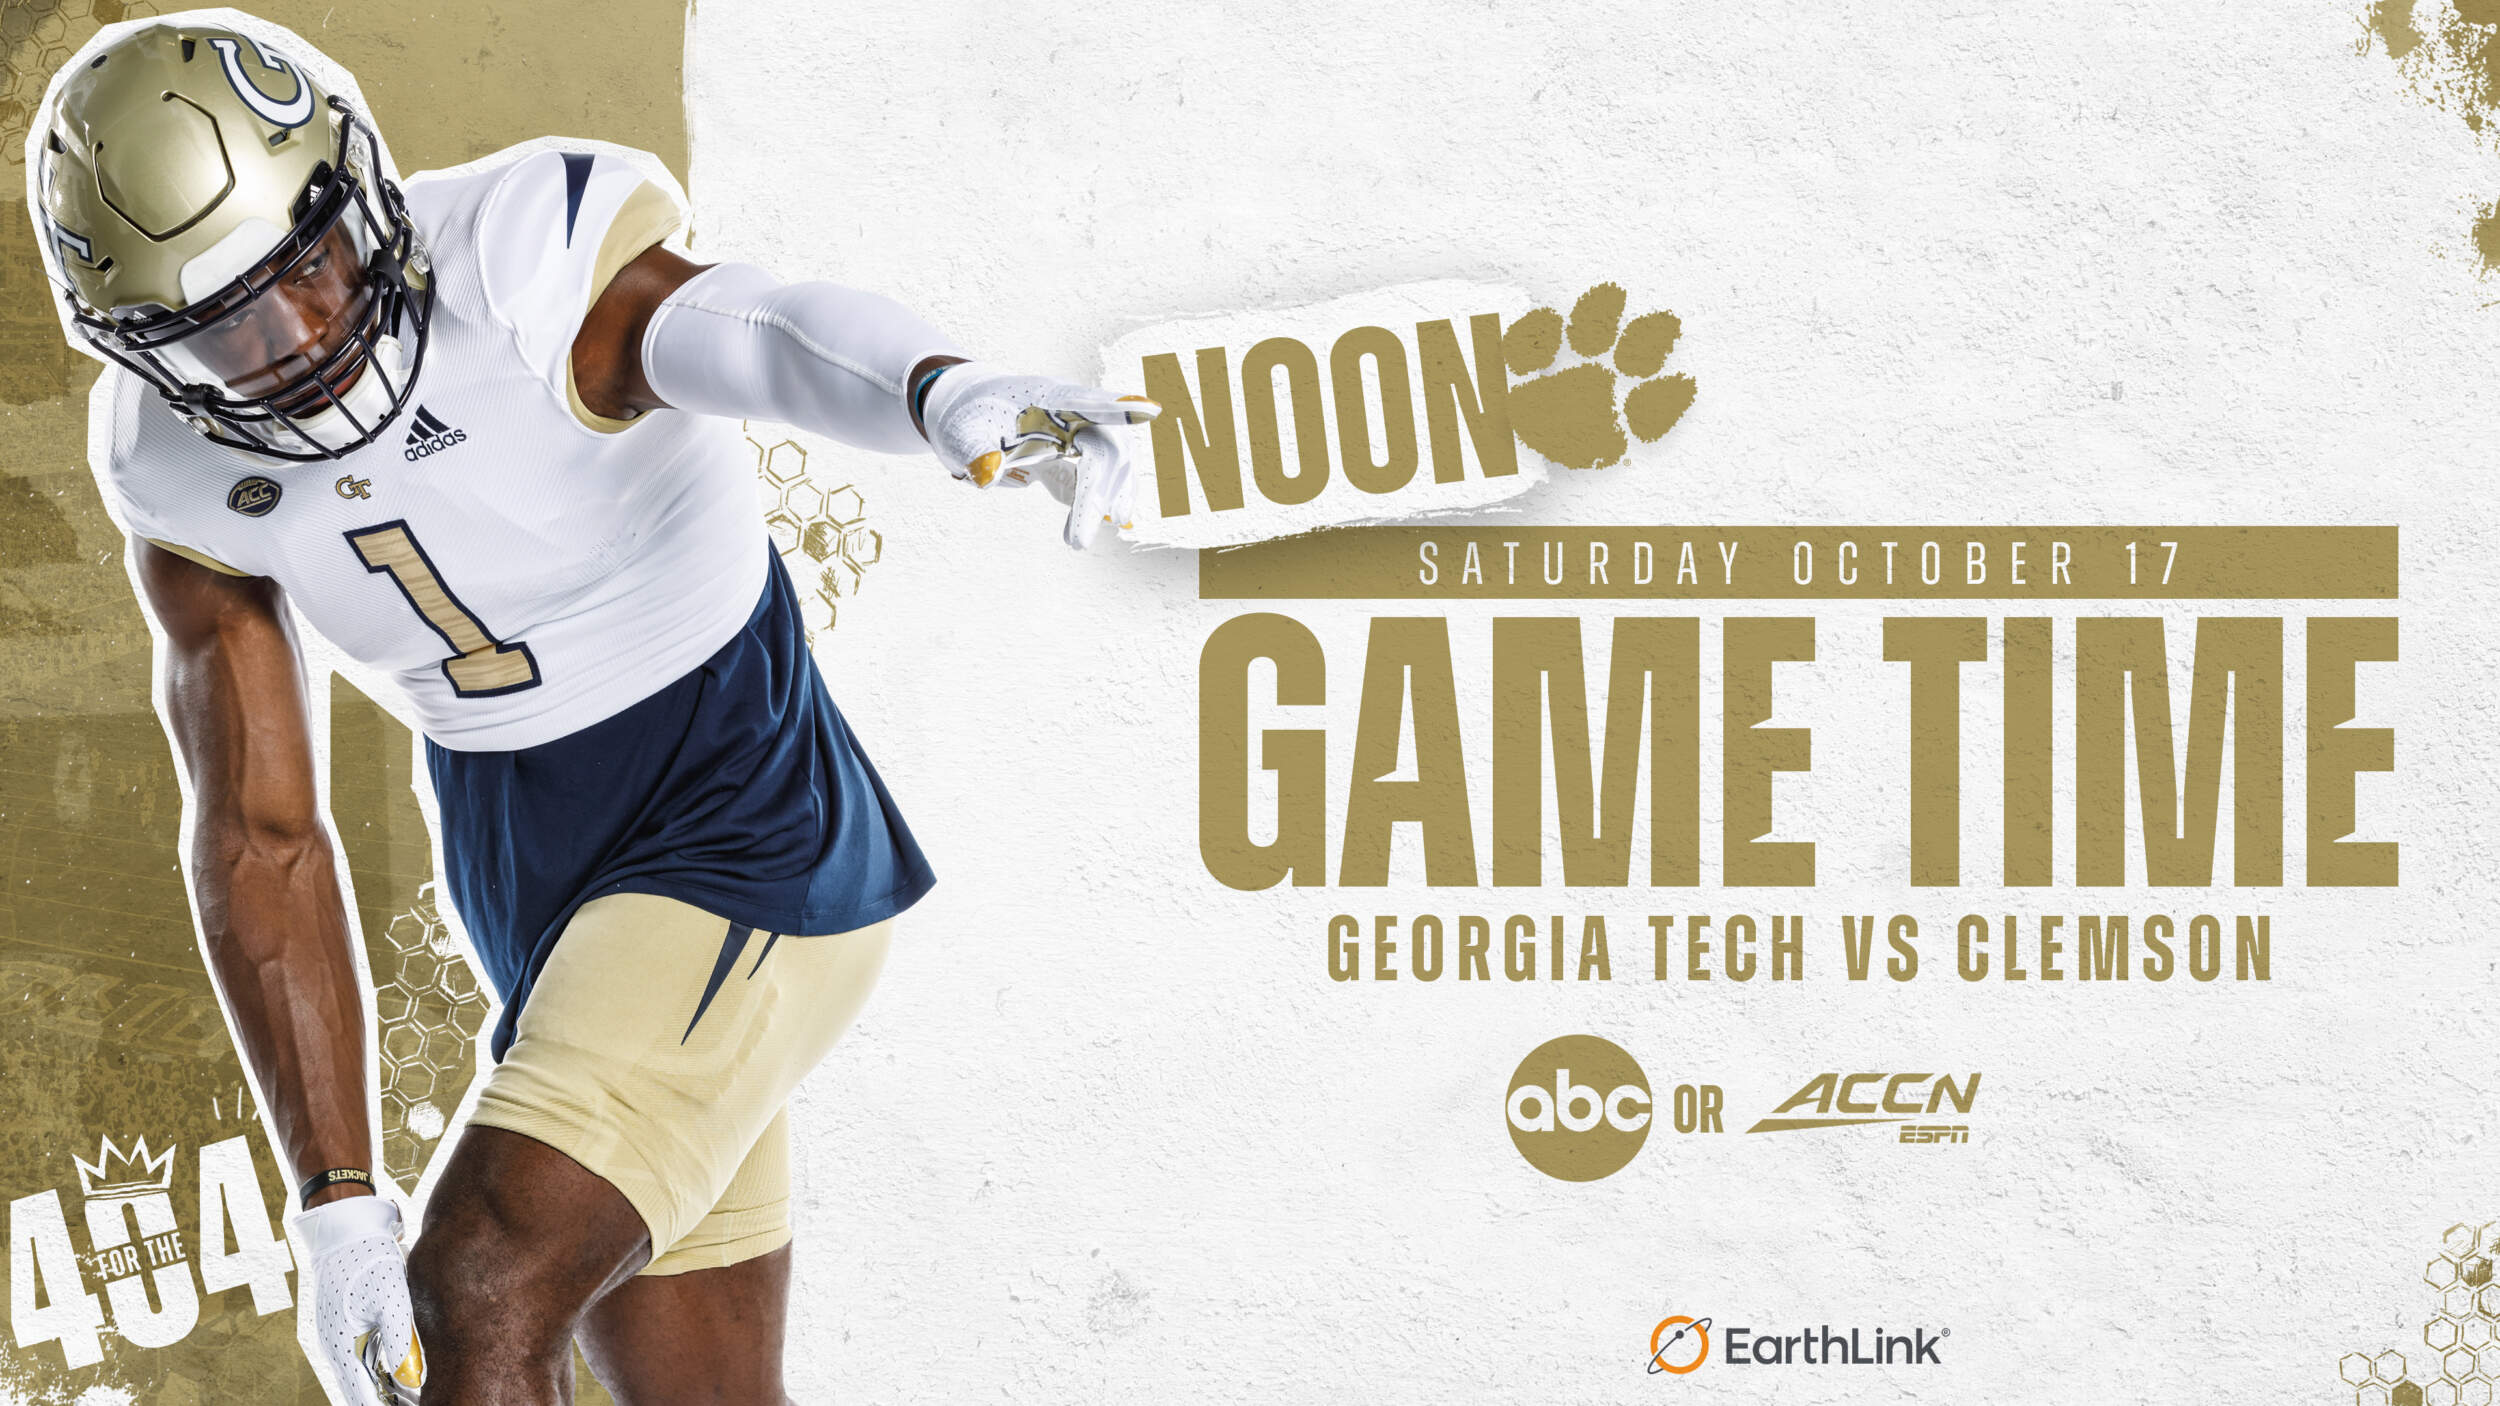 Game Time Set For Gt-clemson On Oct 17 Football Georgia Tech Yellow Jackets